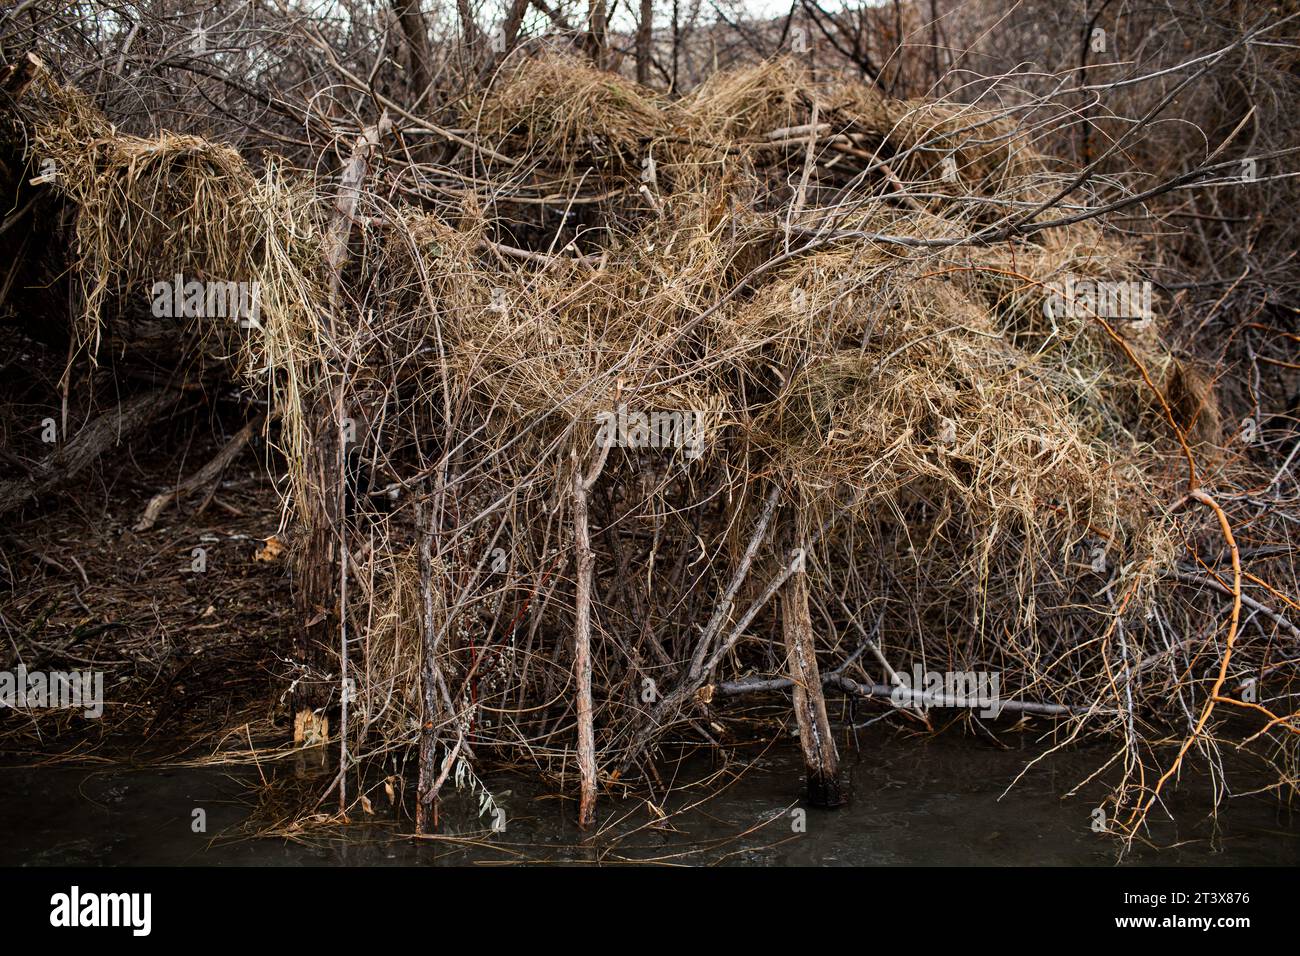 Handcrafted duck blind made of branches provides cover by the ri Stock Photo